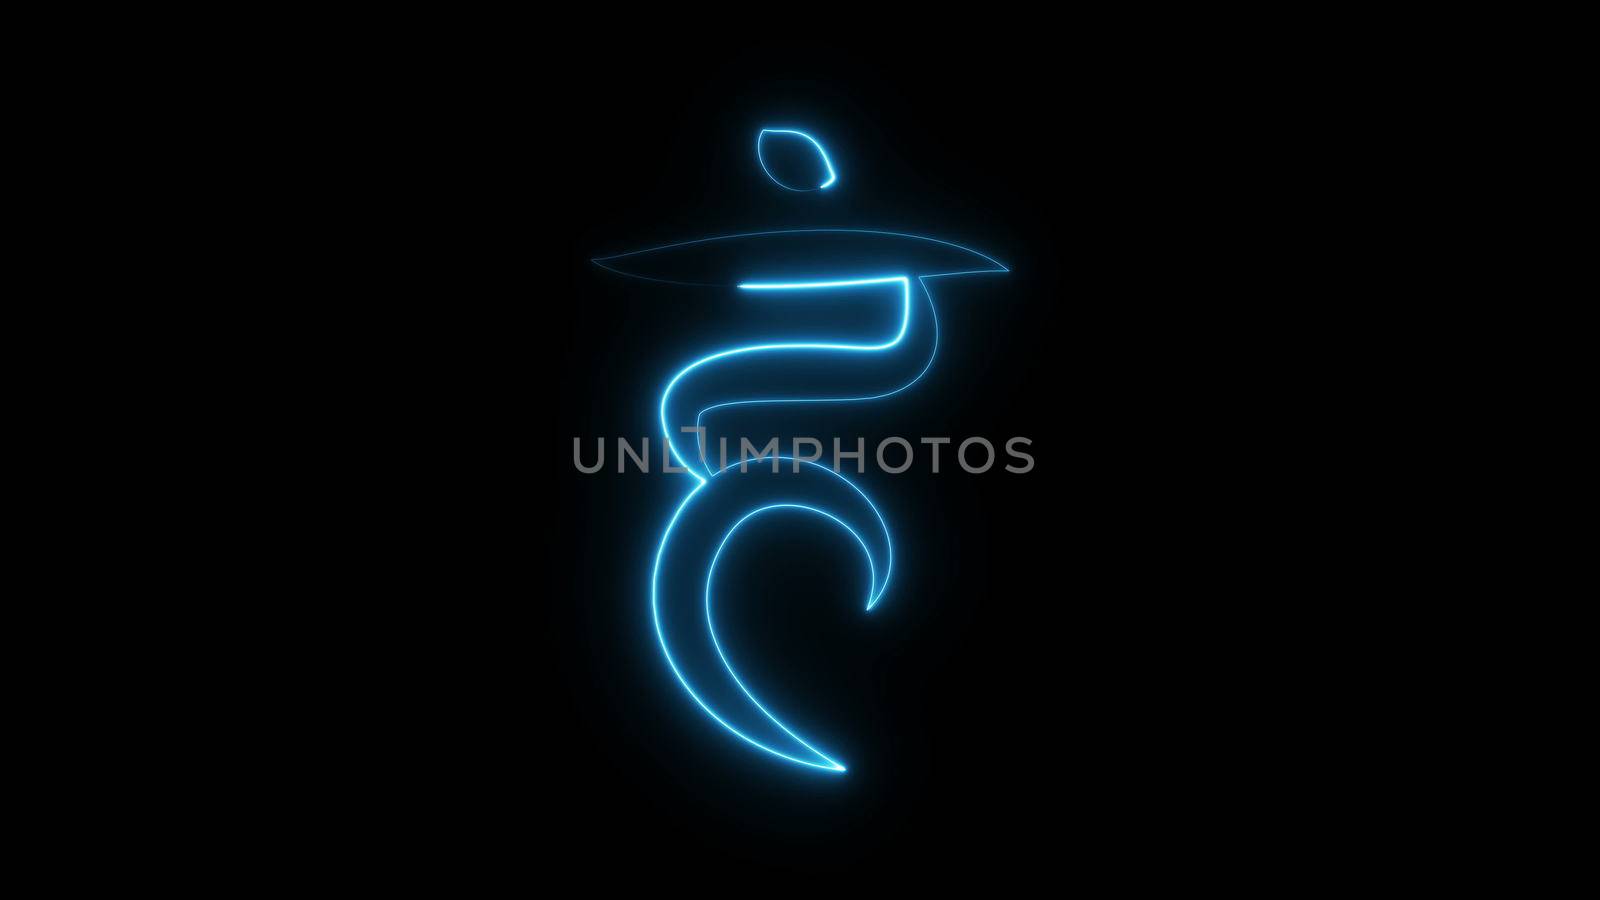 Burning stylish chakras symbol in space, 3d rendering by nolimit046